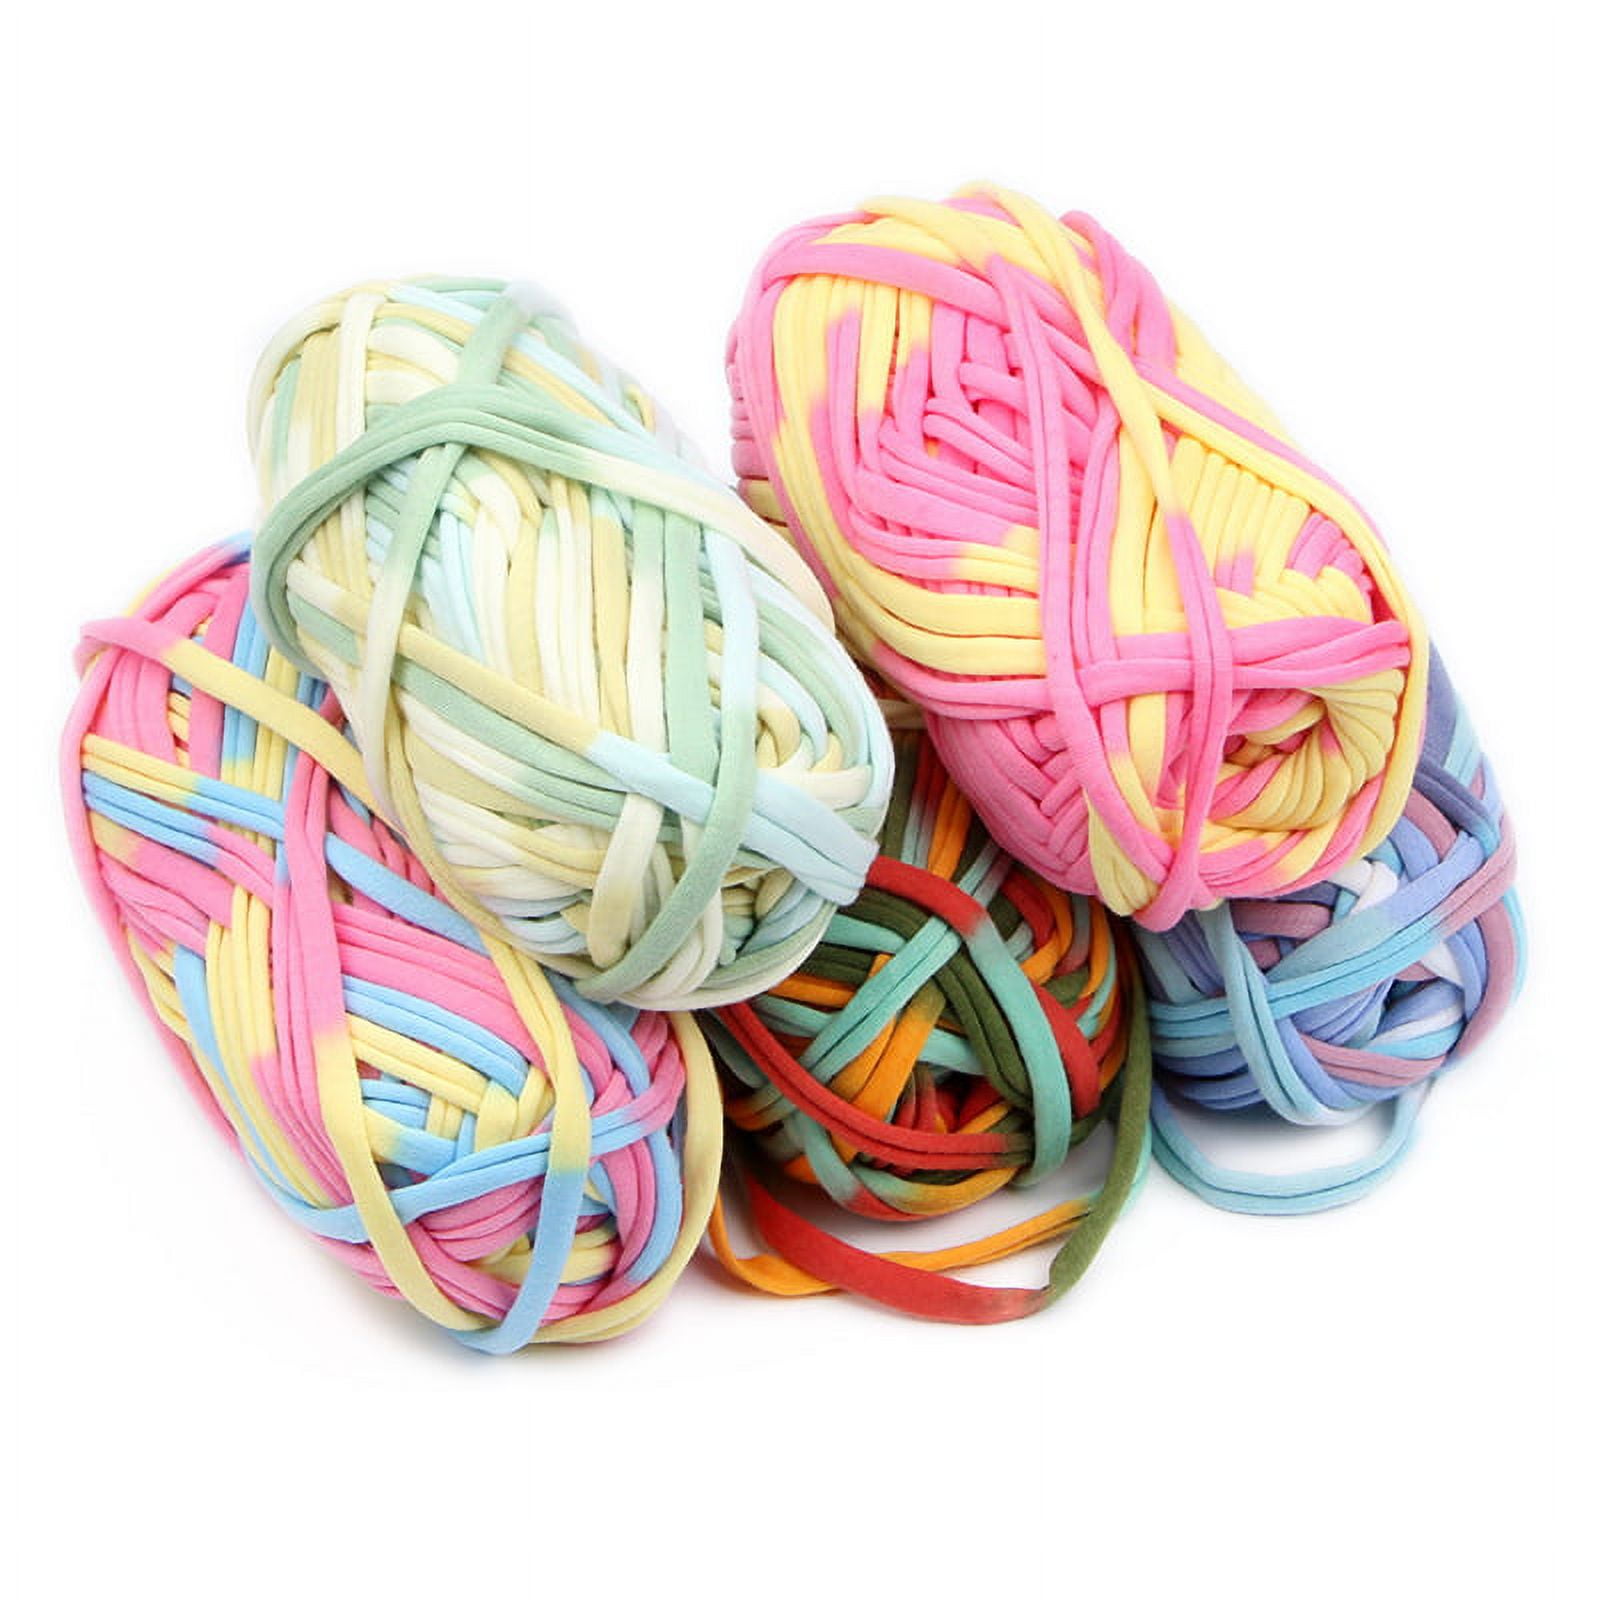 T-shirt yarn for crocheting baskets, bags, rugs and home decor. Nut –  Knitznpurlz